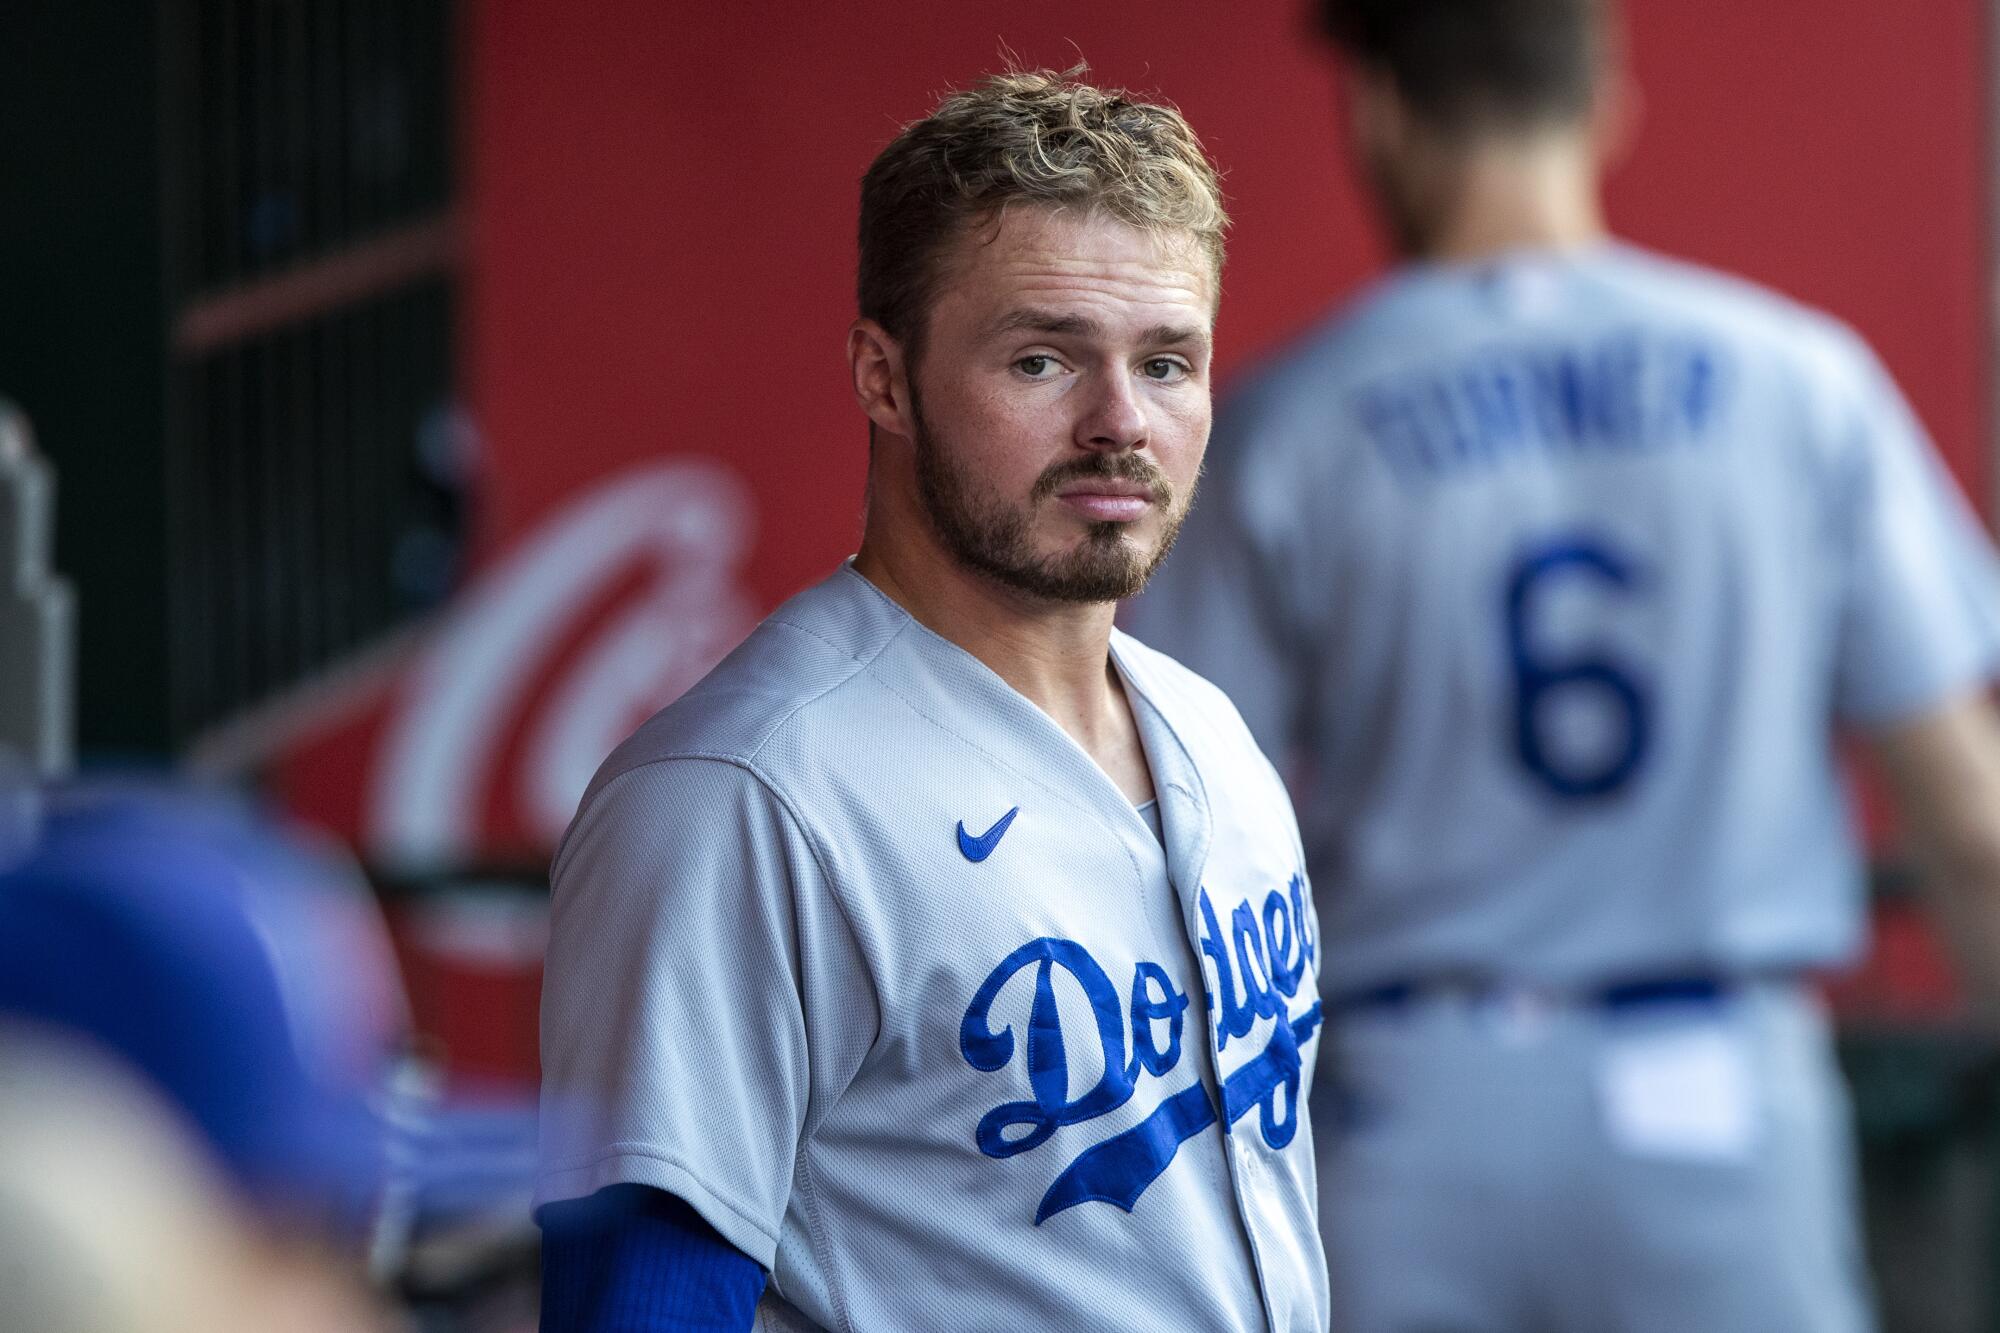 Los Angeles Dodgers' Gavin Lux looks over in the dugout before a baseball game.